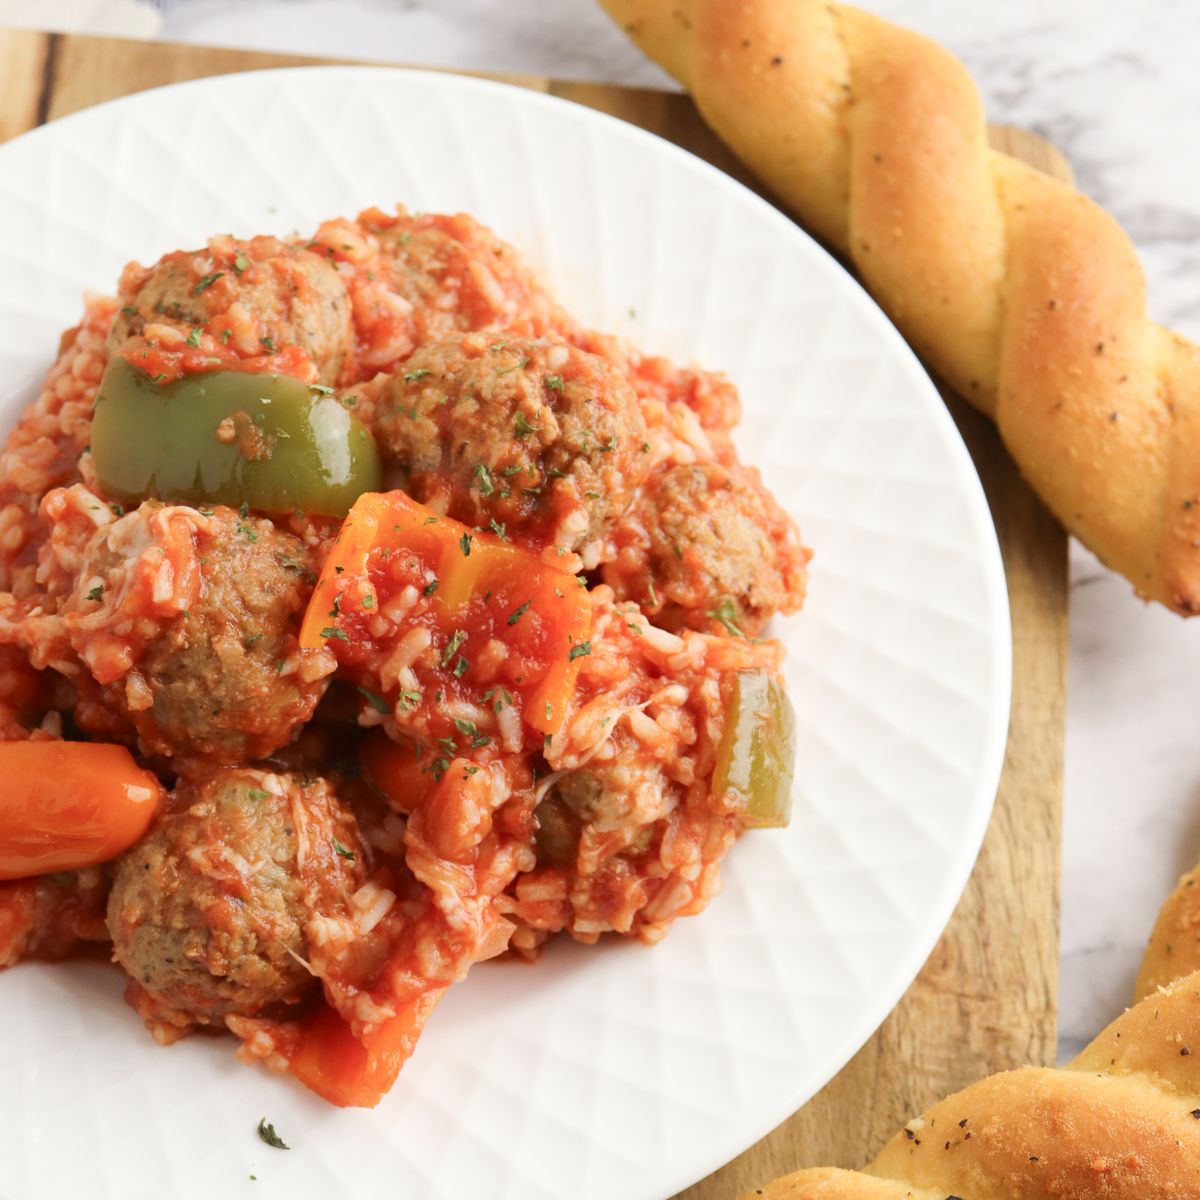 A plate with meatballs and vegetables on it.